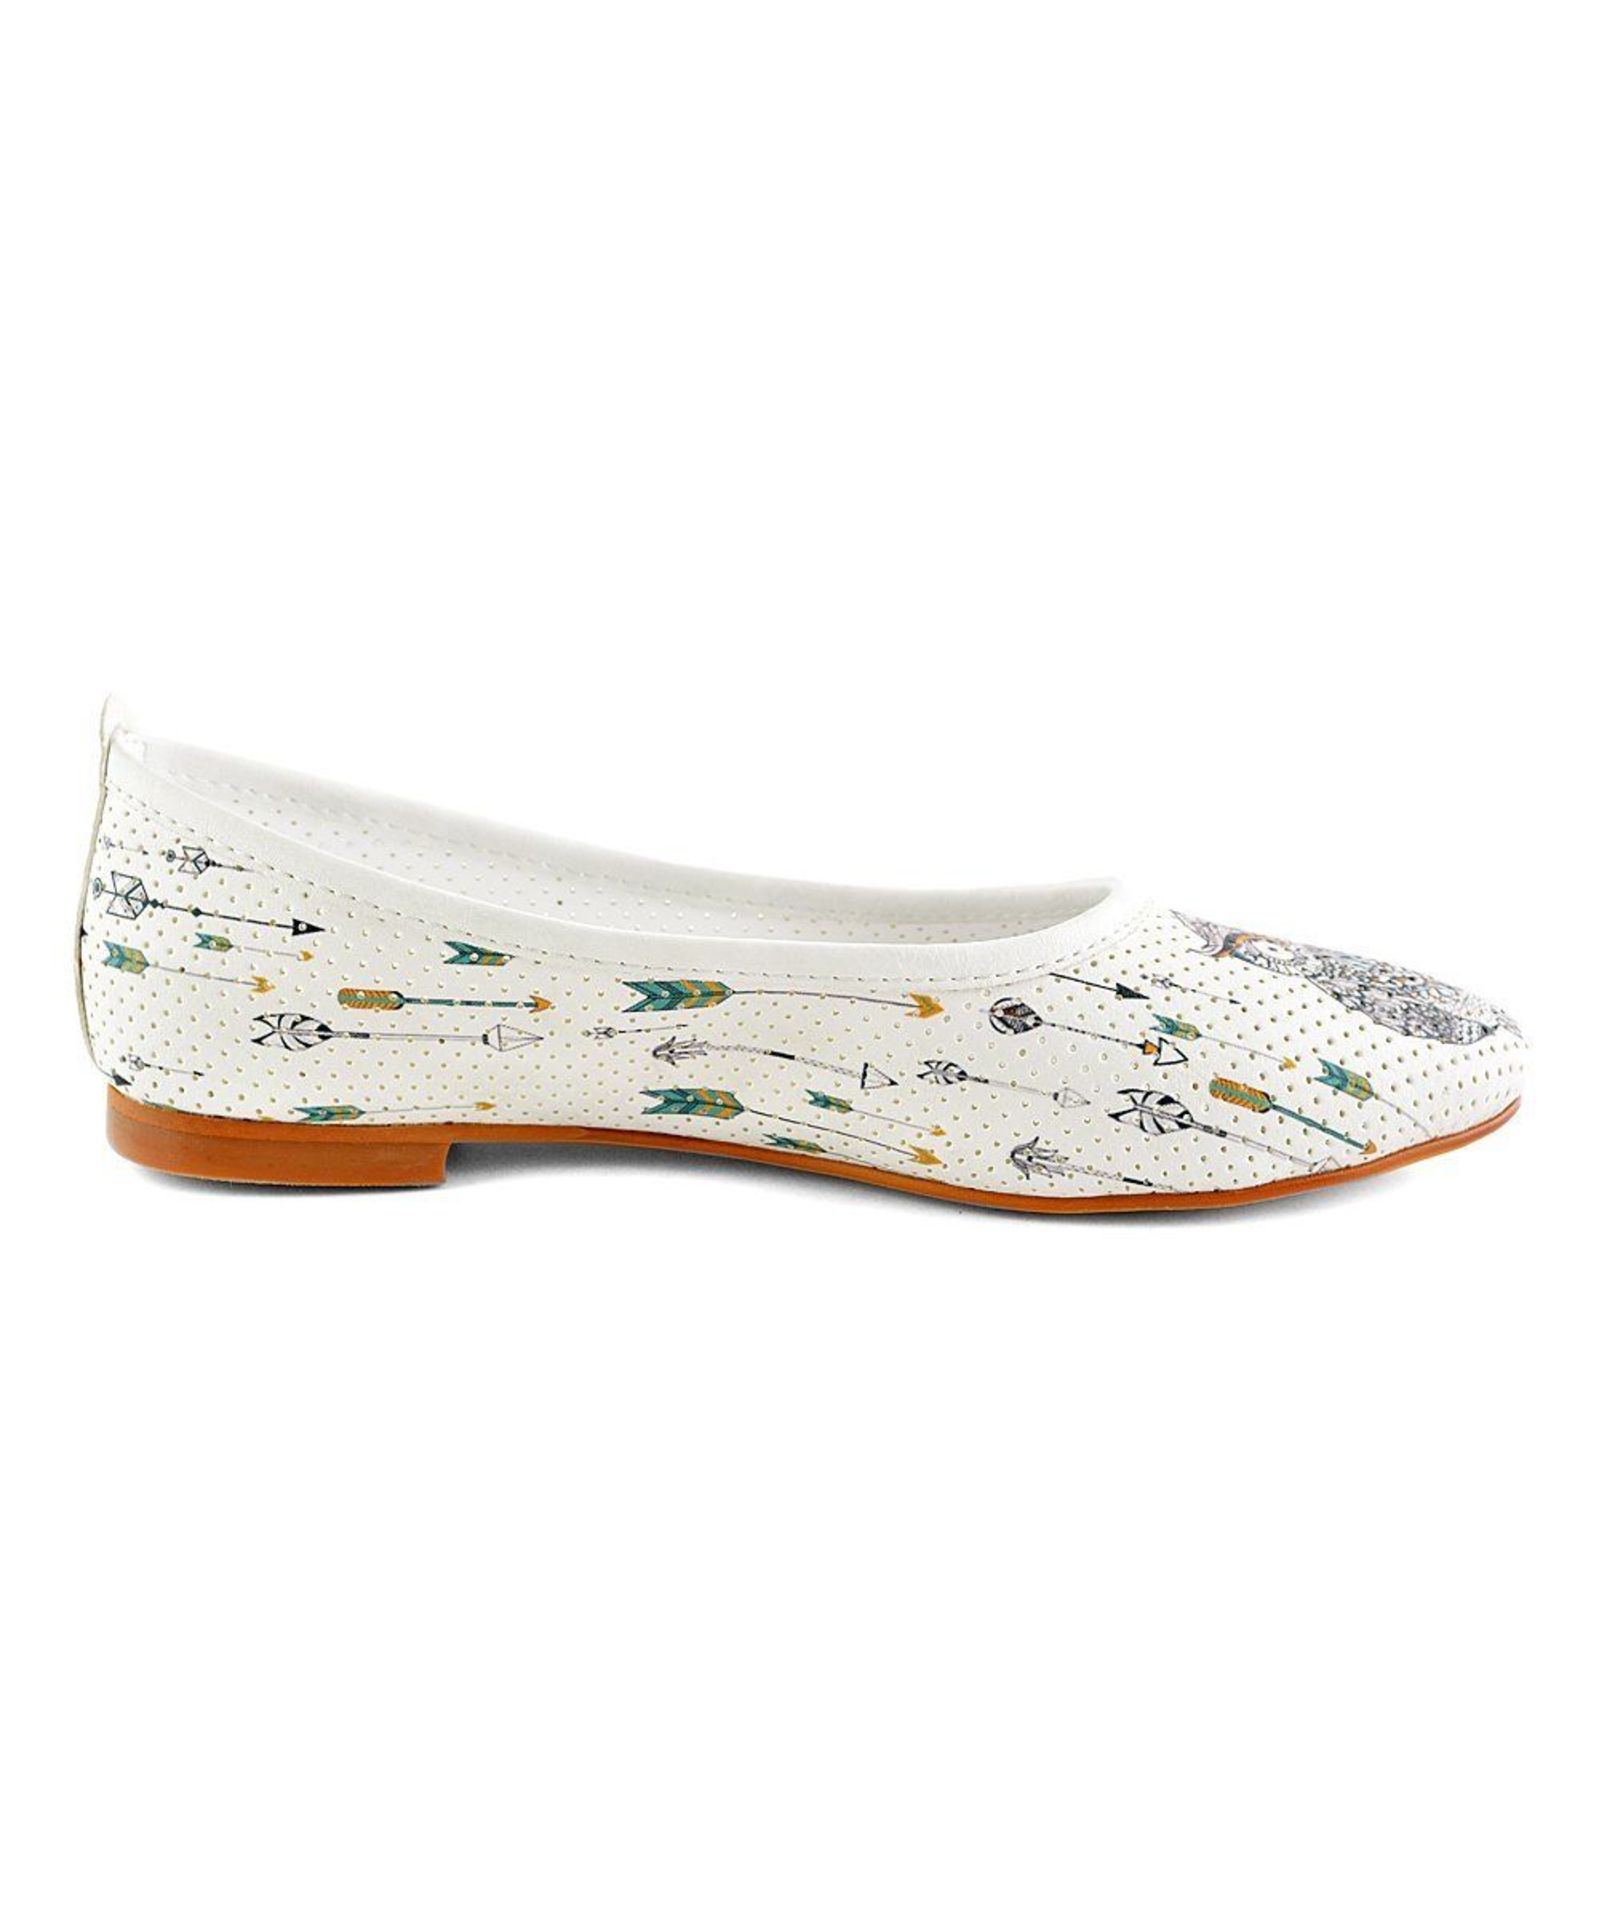 Neefs White & Black Owl Ballet Flat (Uk Size 7:Us Size 9) (New with box) [Ref: 48186820-H-001] - Image 3 of 5